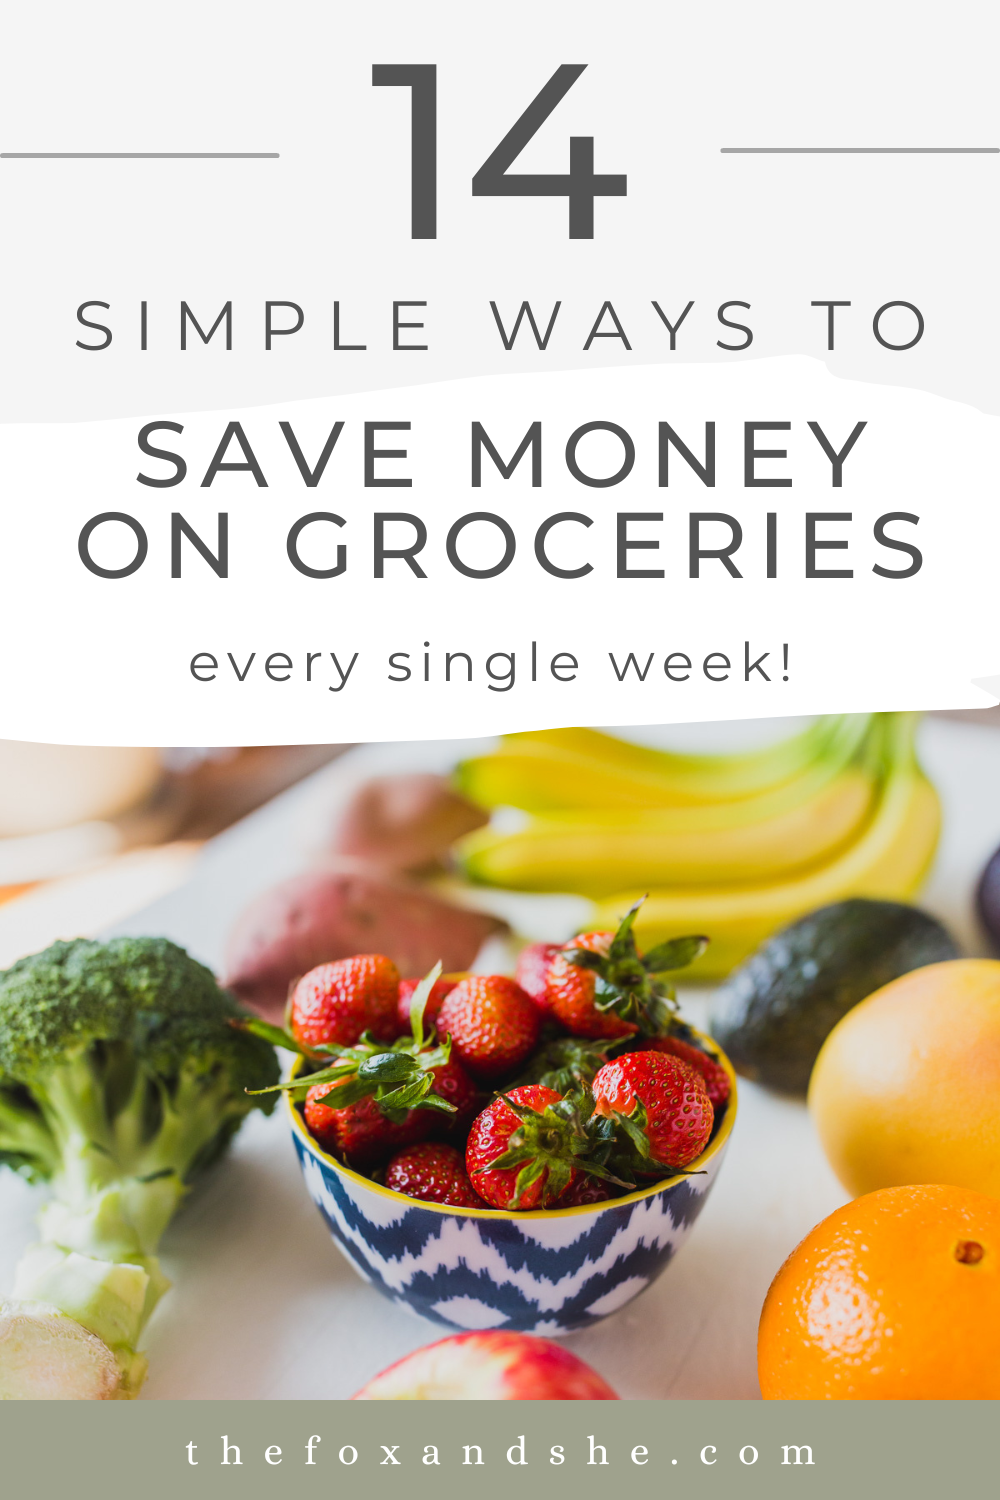 Want to save money on groceries? These 14 tips will make saving money every week a breeze.